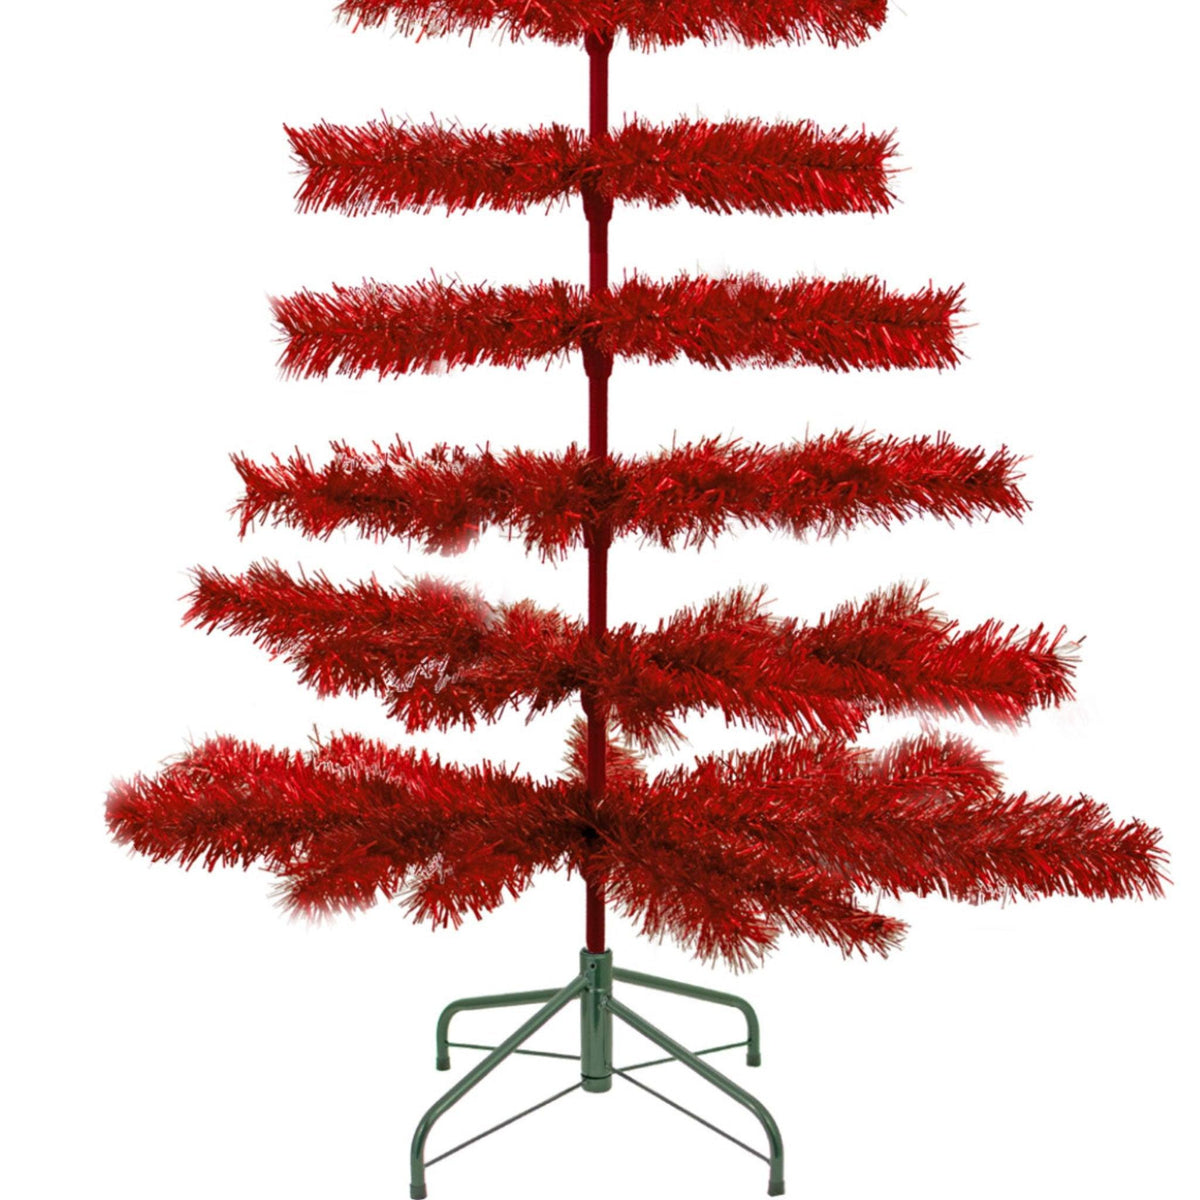 5FT Trees come with a lightweight and sturdy green metal base that folds for easy storage